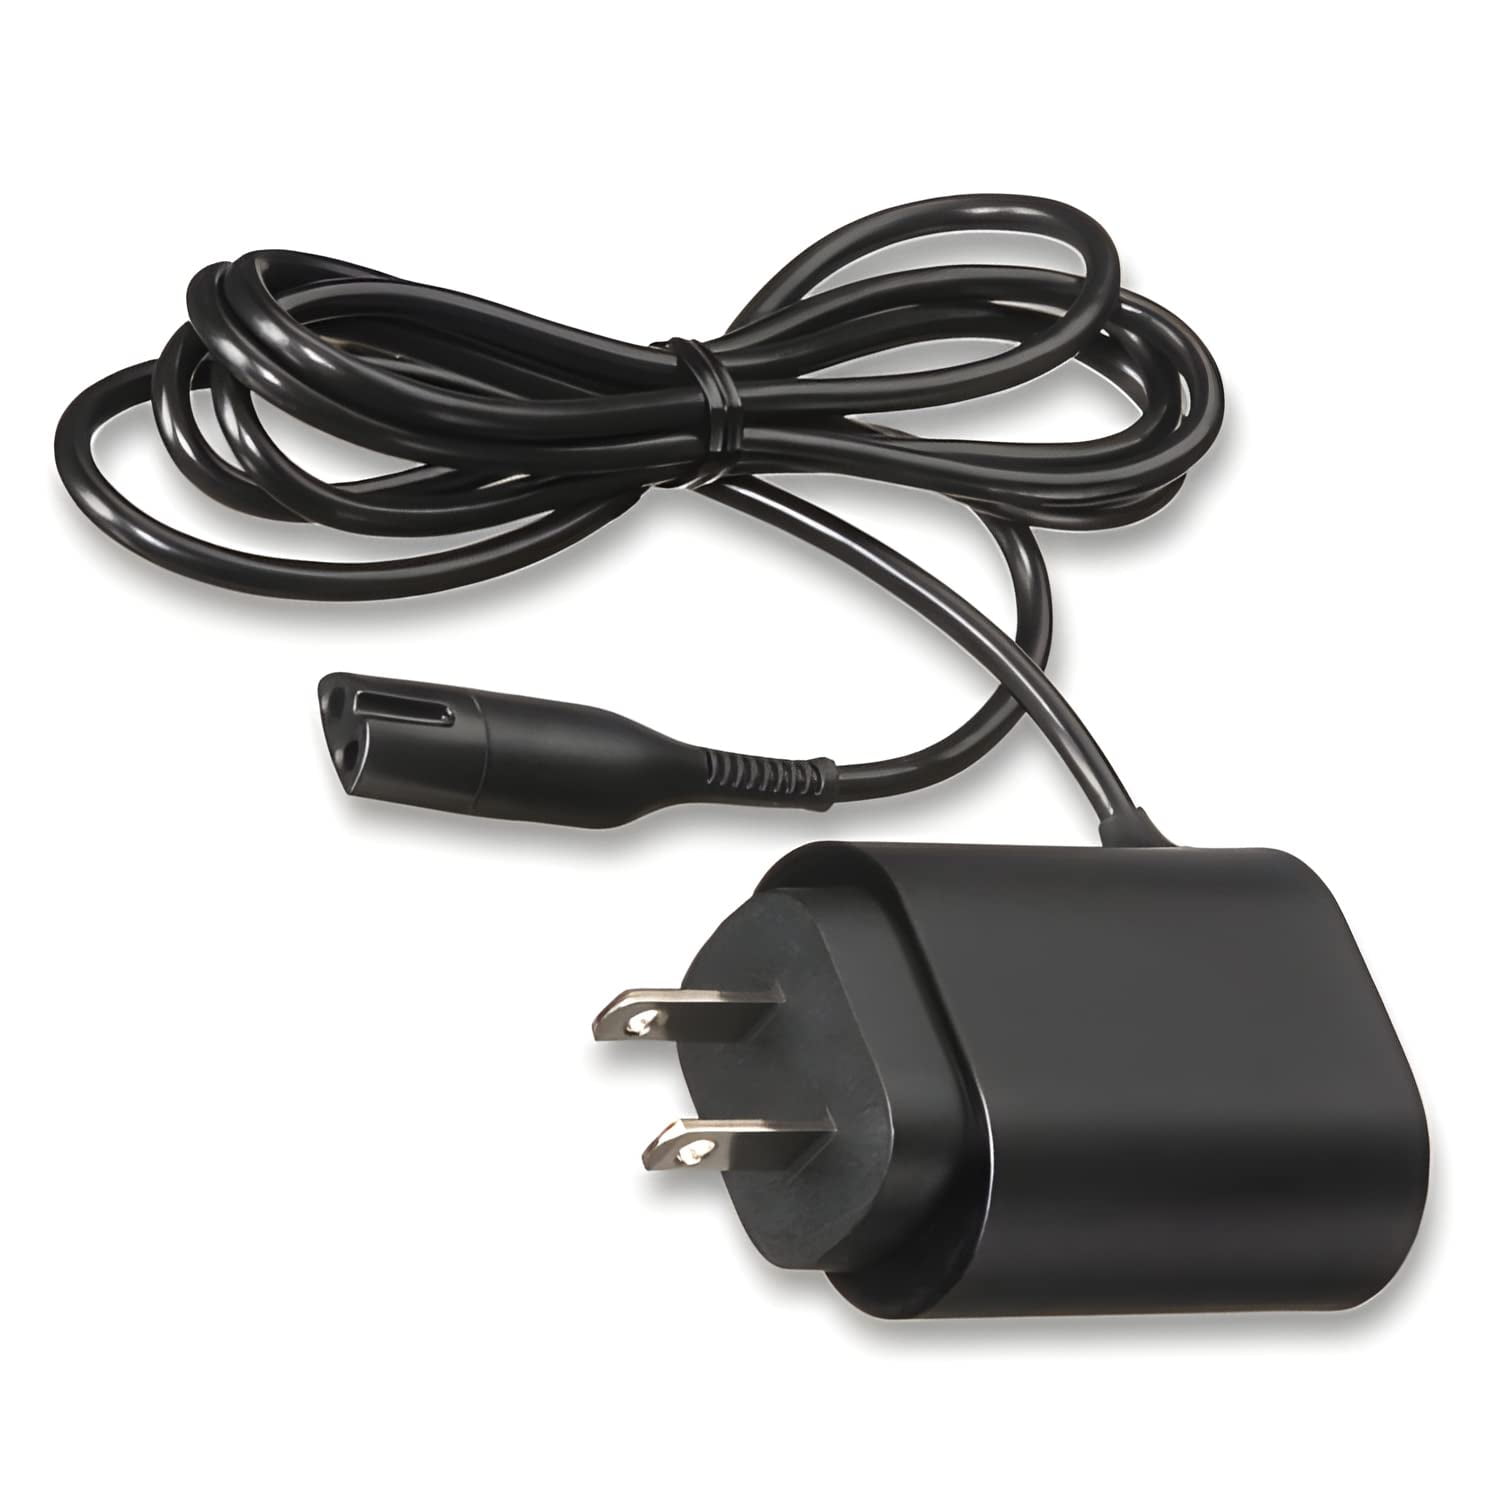 Braun - Replacement Wall Charger for Braun Shavers Series 1 3 5 7 9 -  Part-No.: 81719643 - Type/Tipo 492-5214/492-5217 - 12V 400mA Wall Power  Adapter (Type 492-5214, Black) 